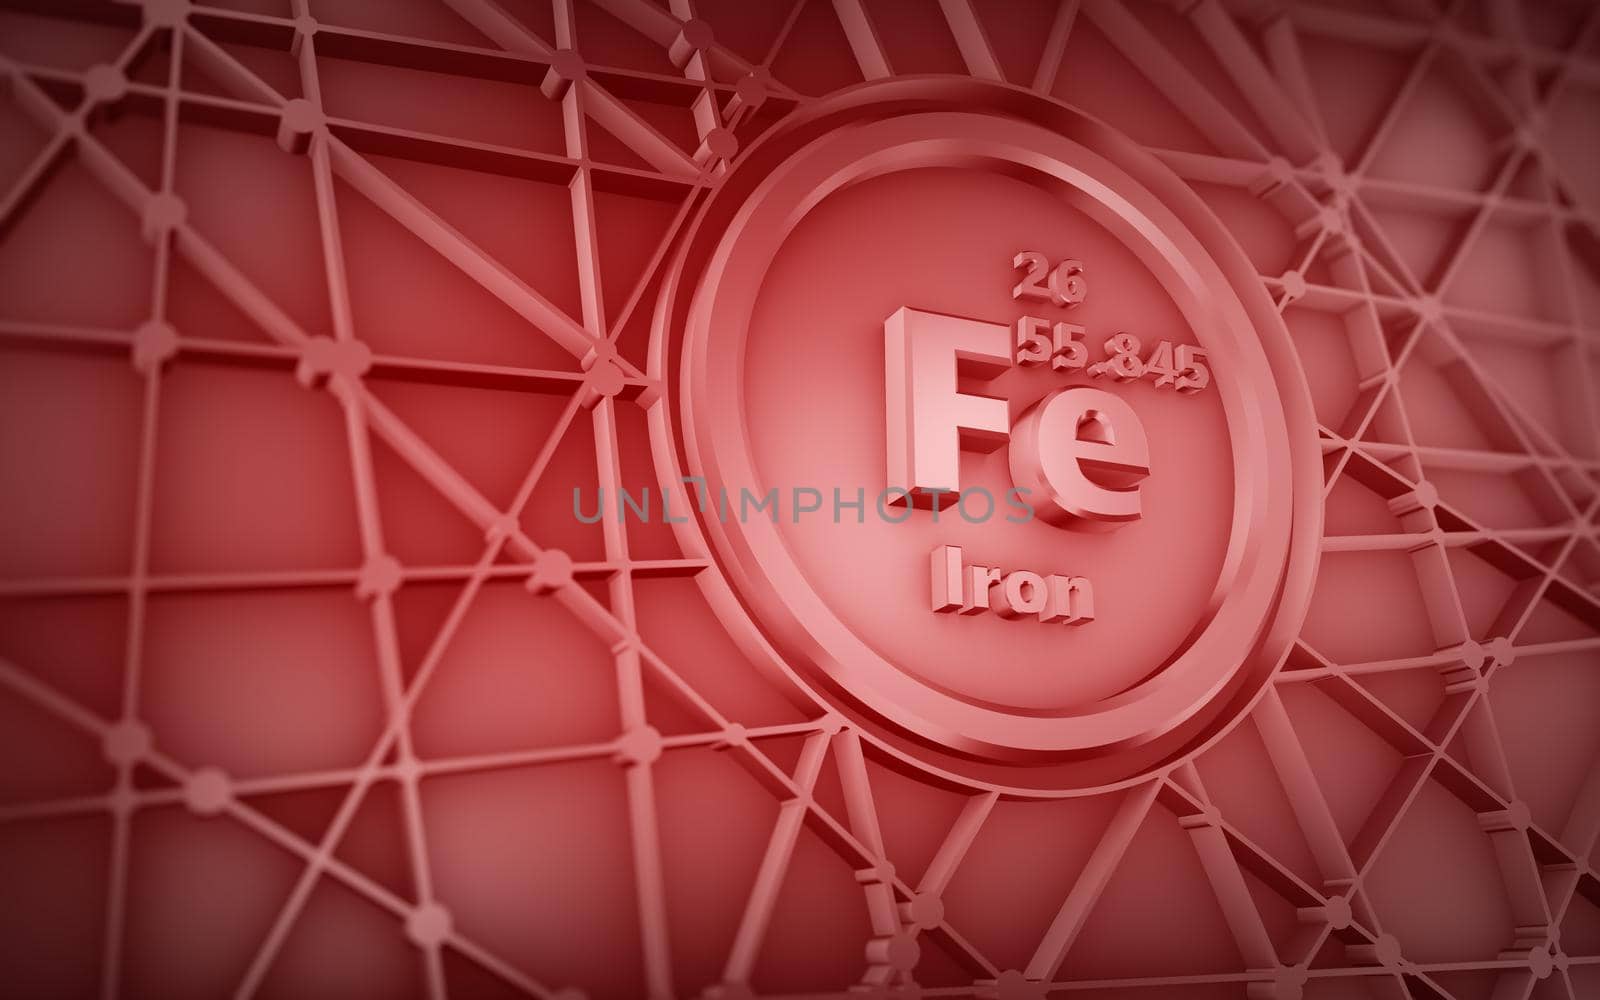 Abstract geometric symbol of the chemical element iron in red tint. 3D rendering.